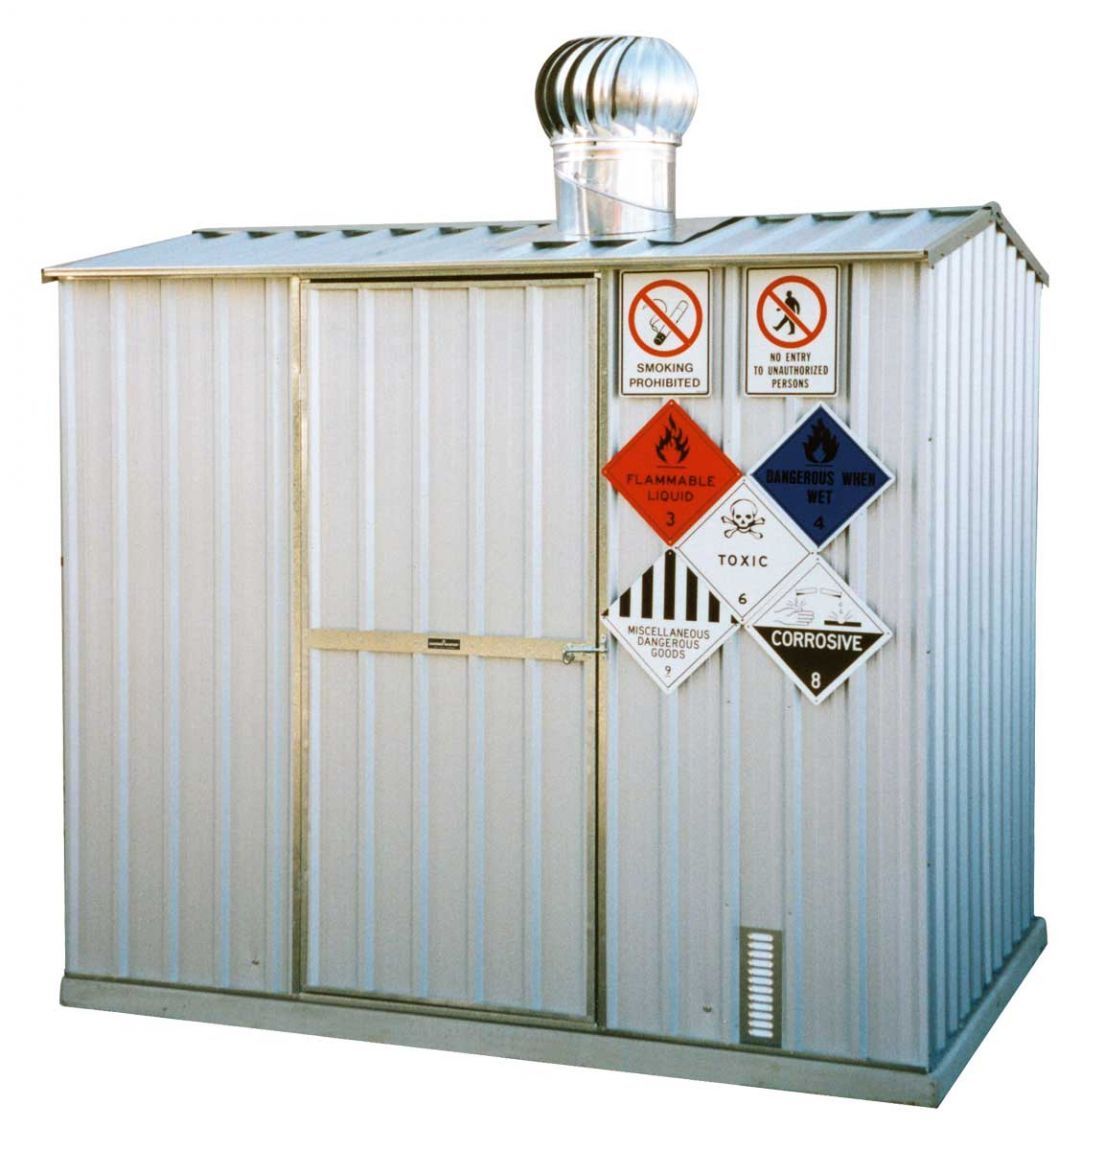 Small chemical storage shed
 